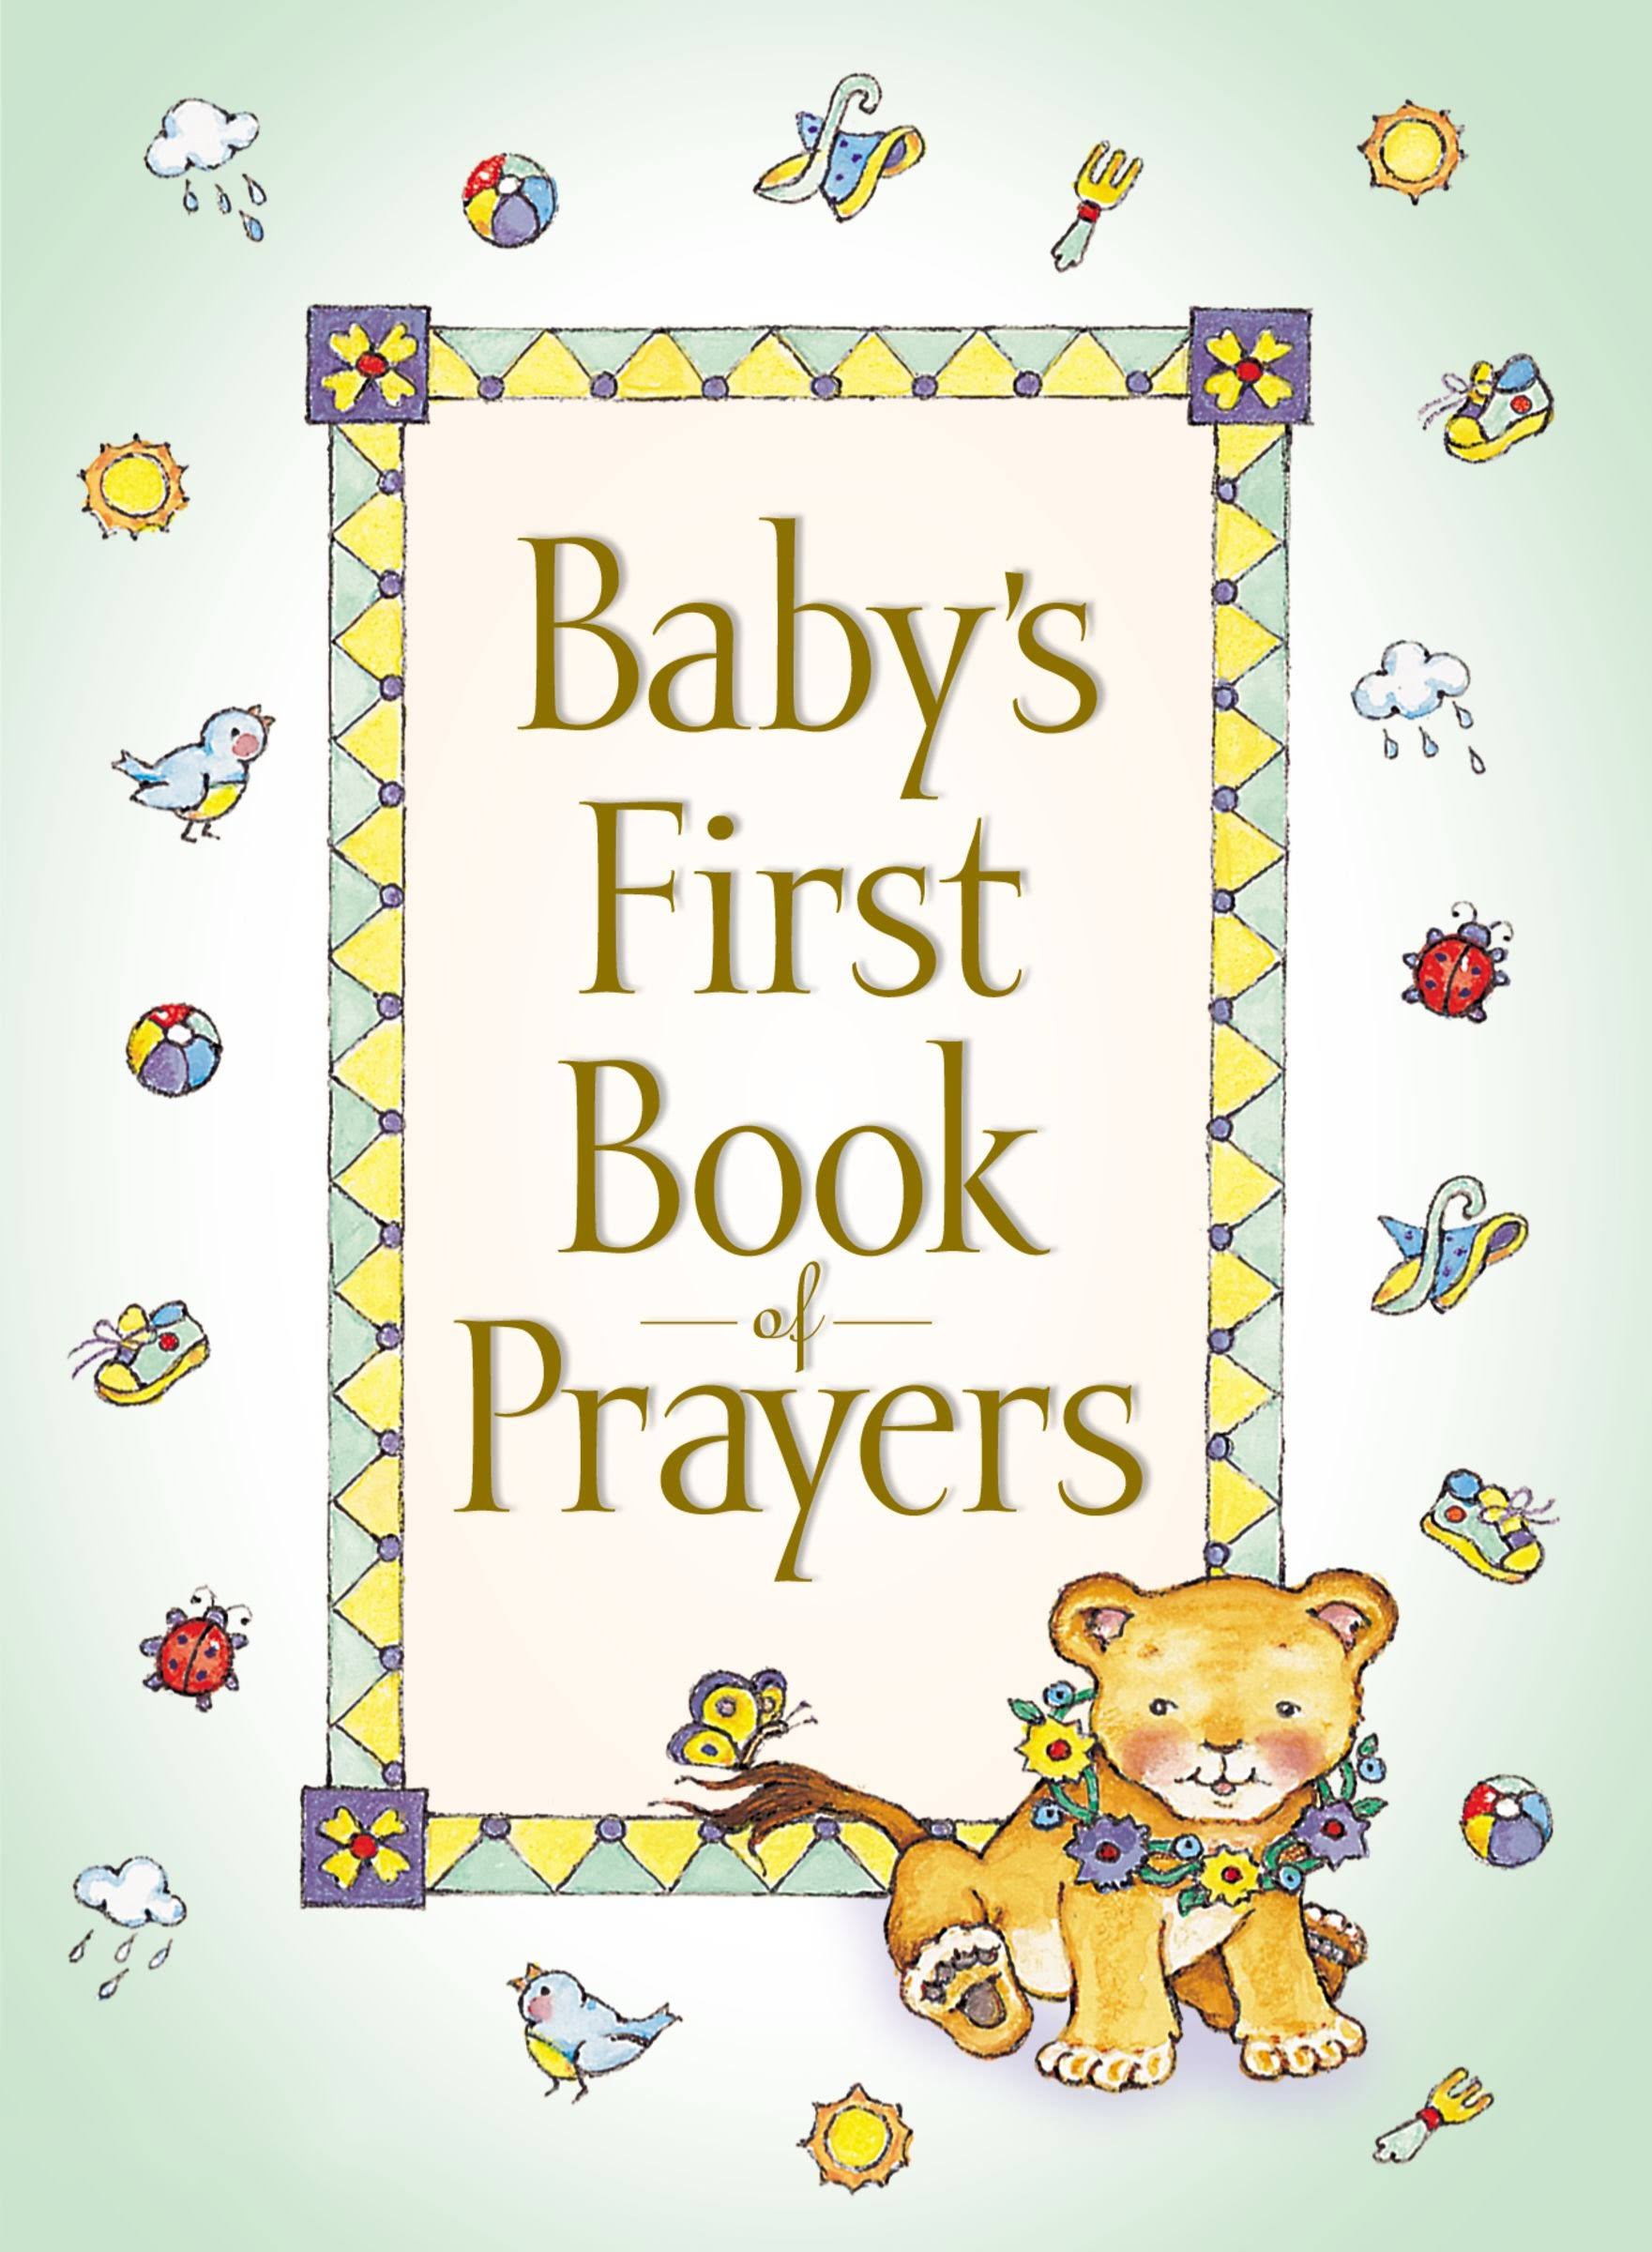 Baby's First Book of Prayers [Book]